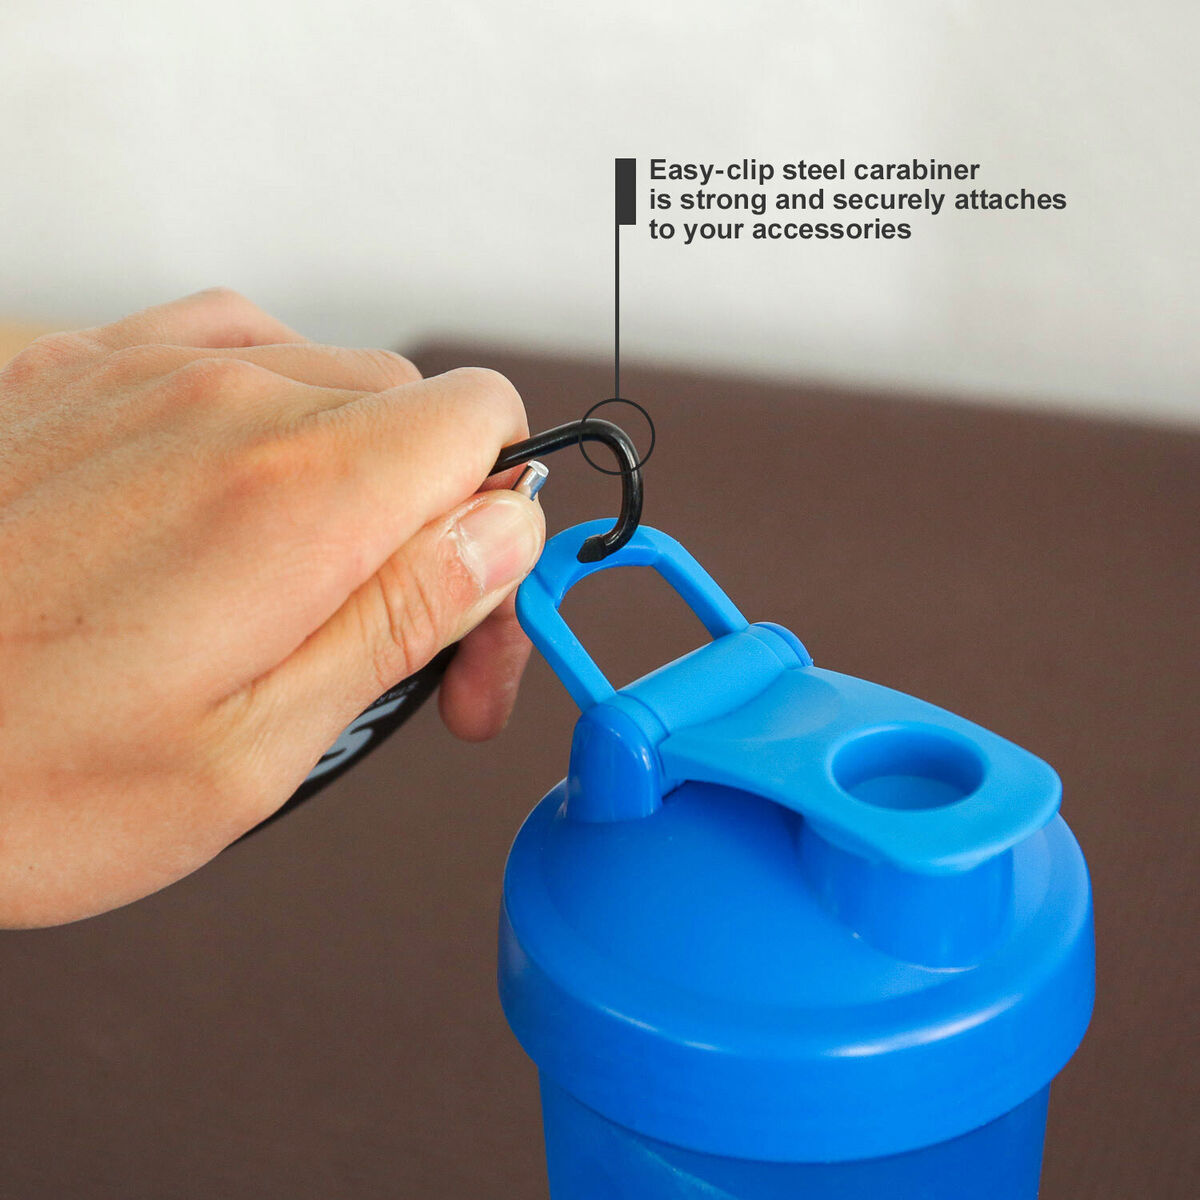 Protein funnel: 2-pack portable supplement holder, protein powder containers